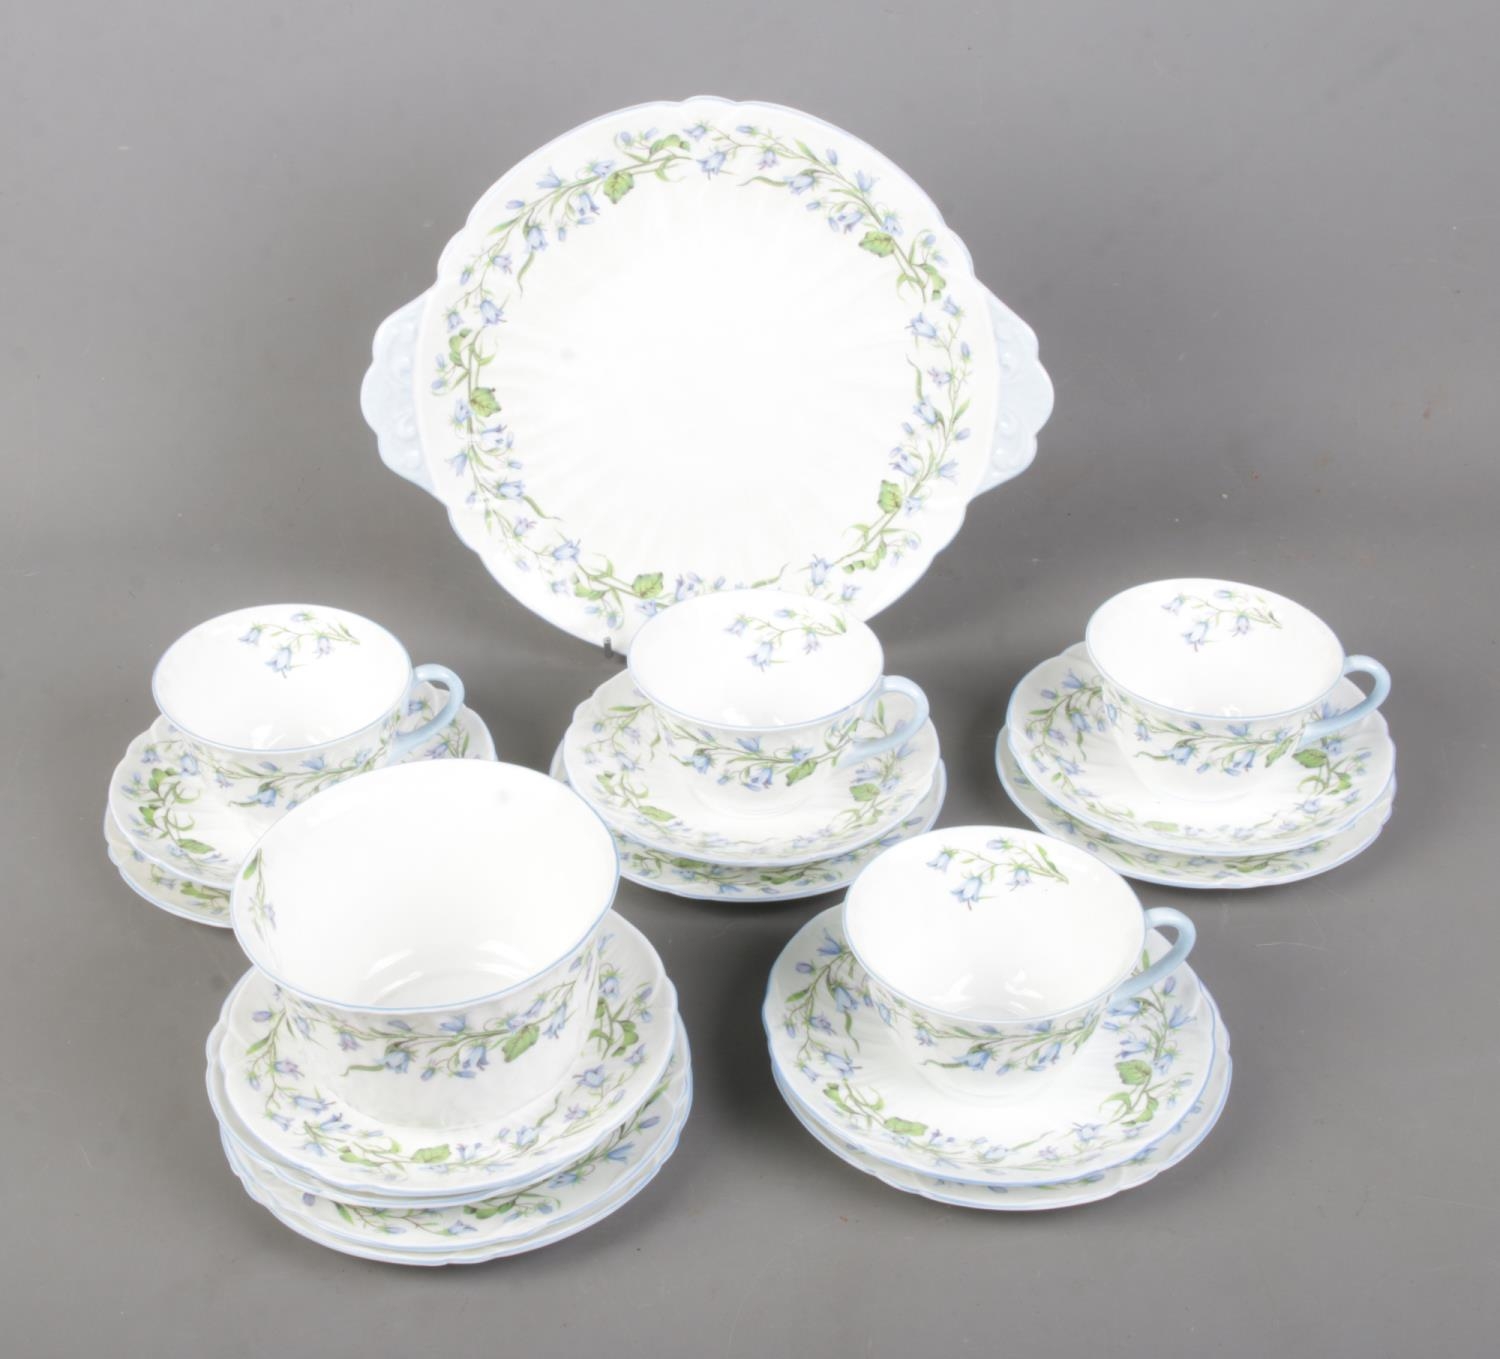 A Shelley part tea service in the Harebell pattern. Approx. 18 pieces.